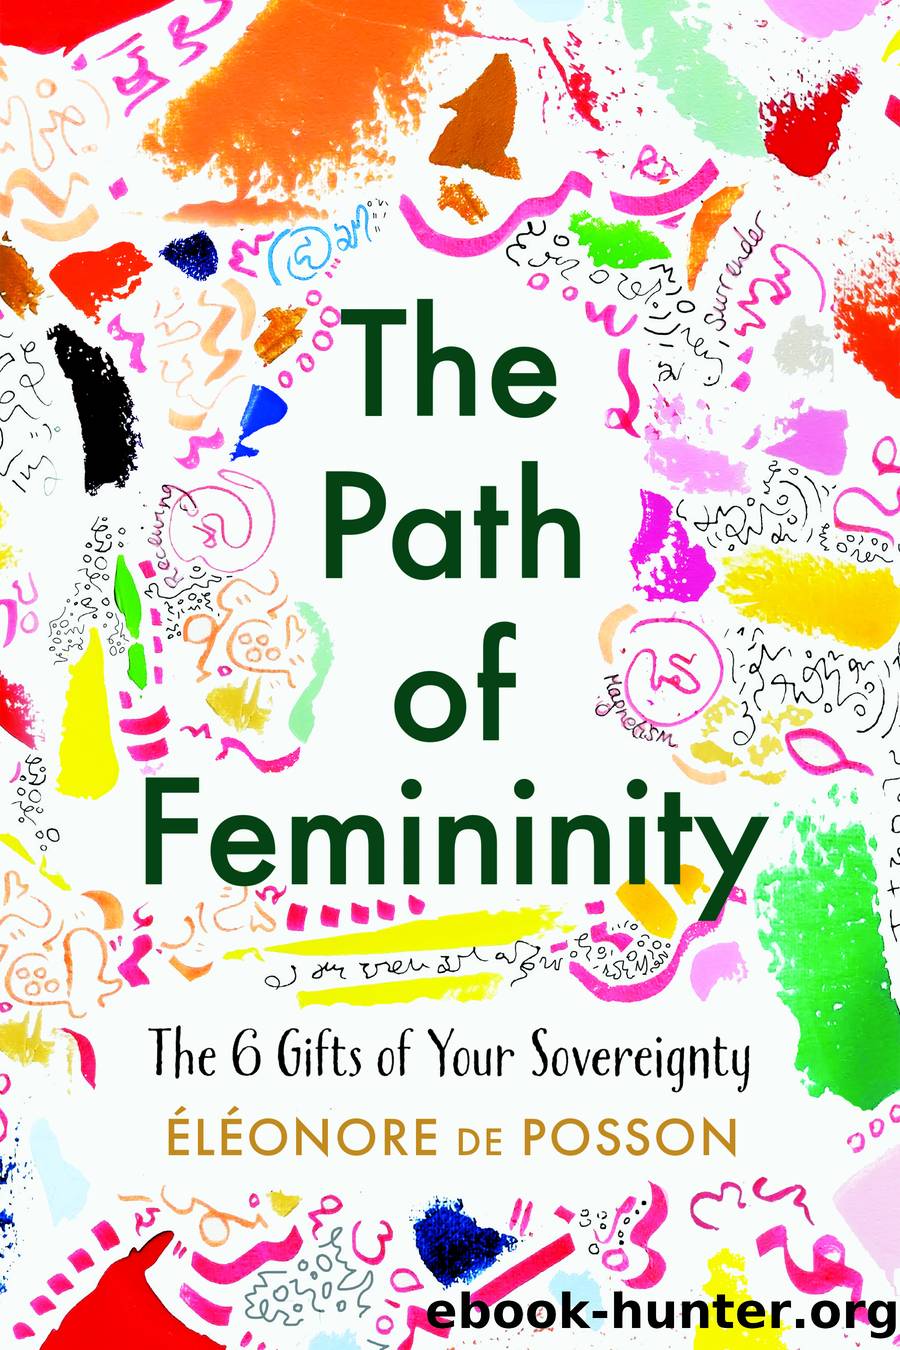 The Path of Femininity; the 6 Gifts of Your Sovereignty by Eléonore de Posson